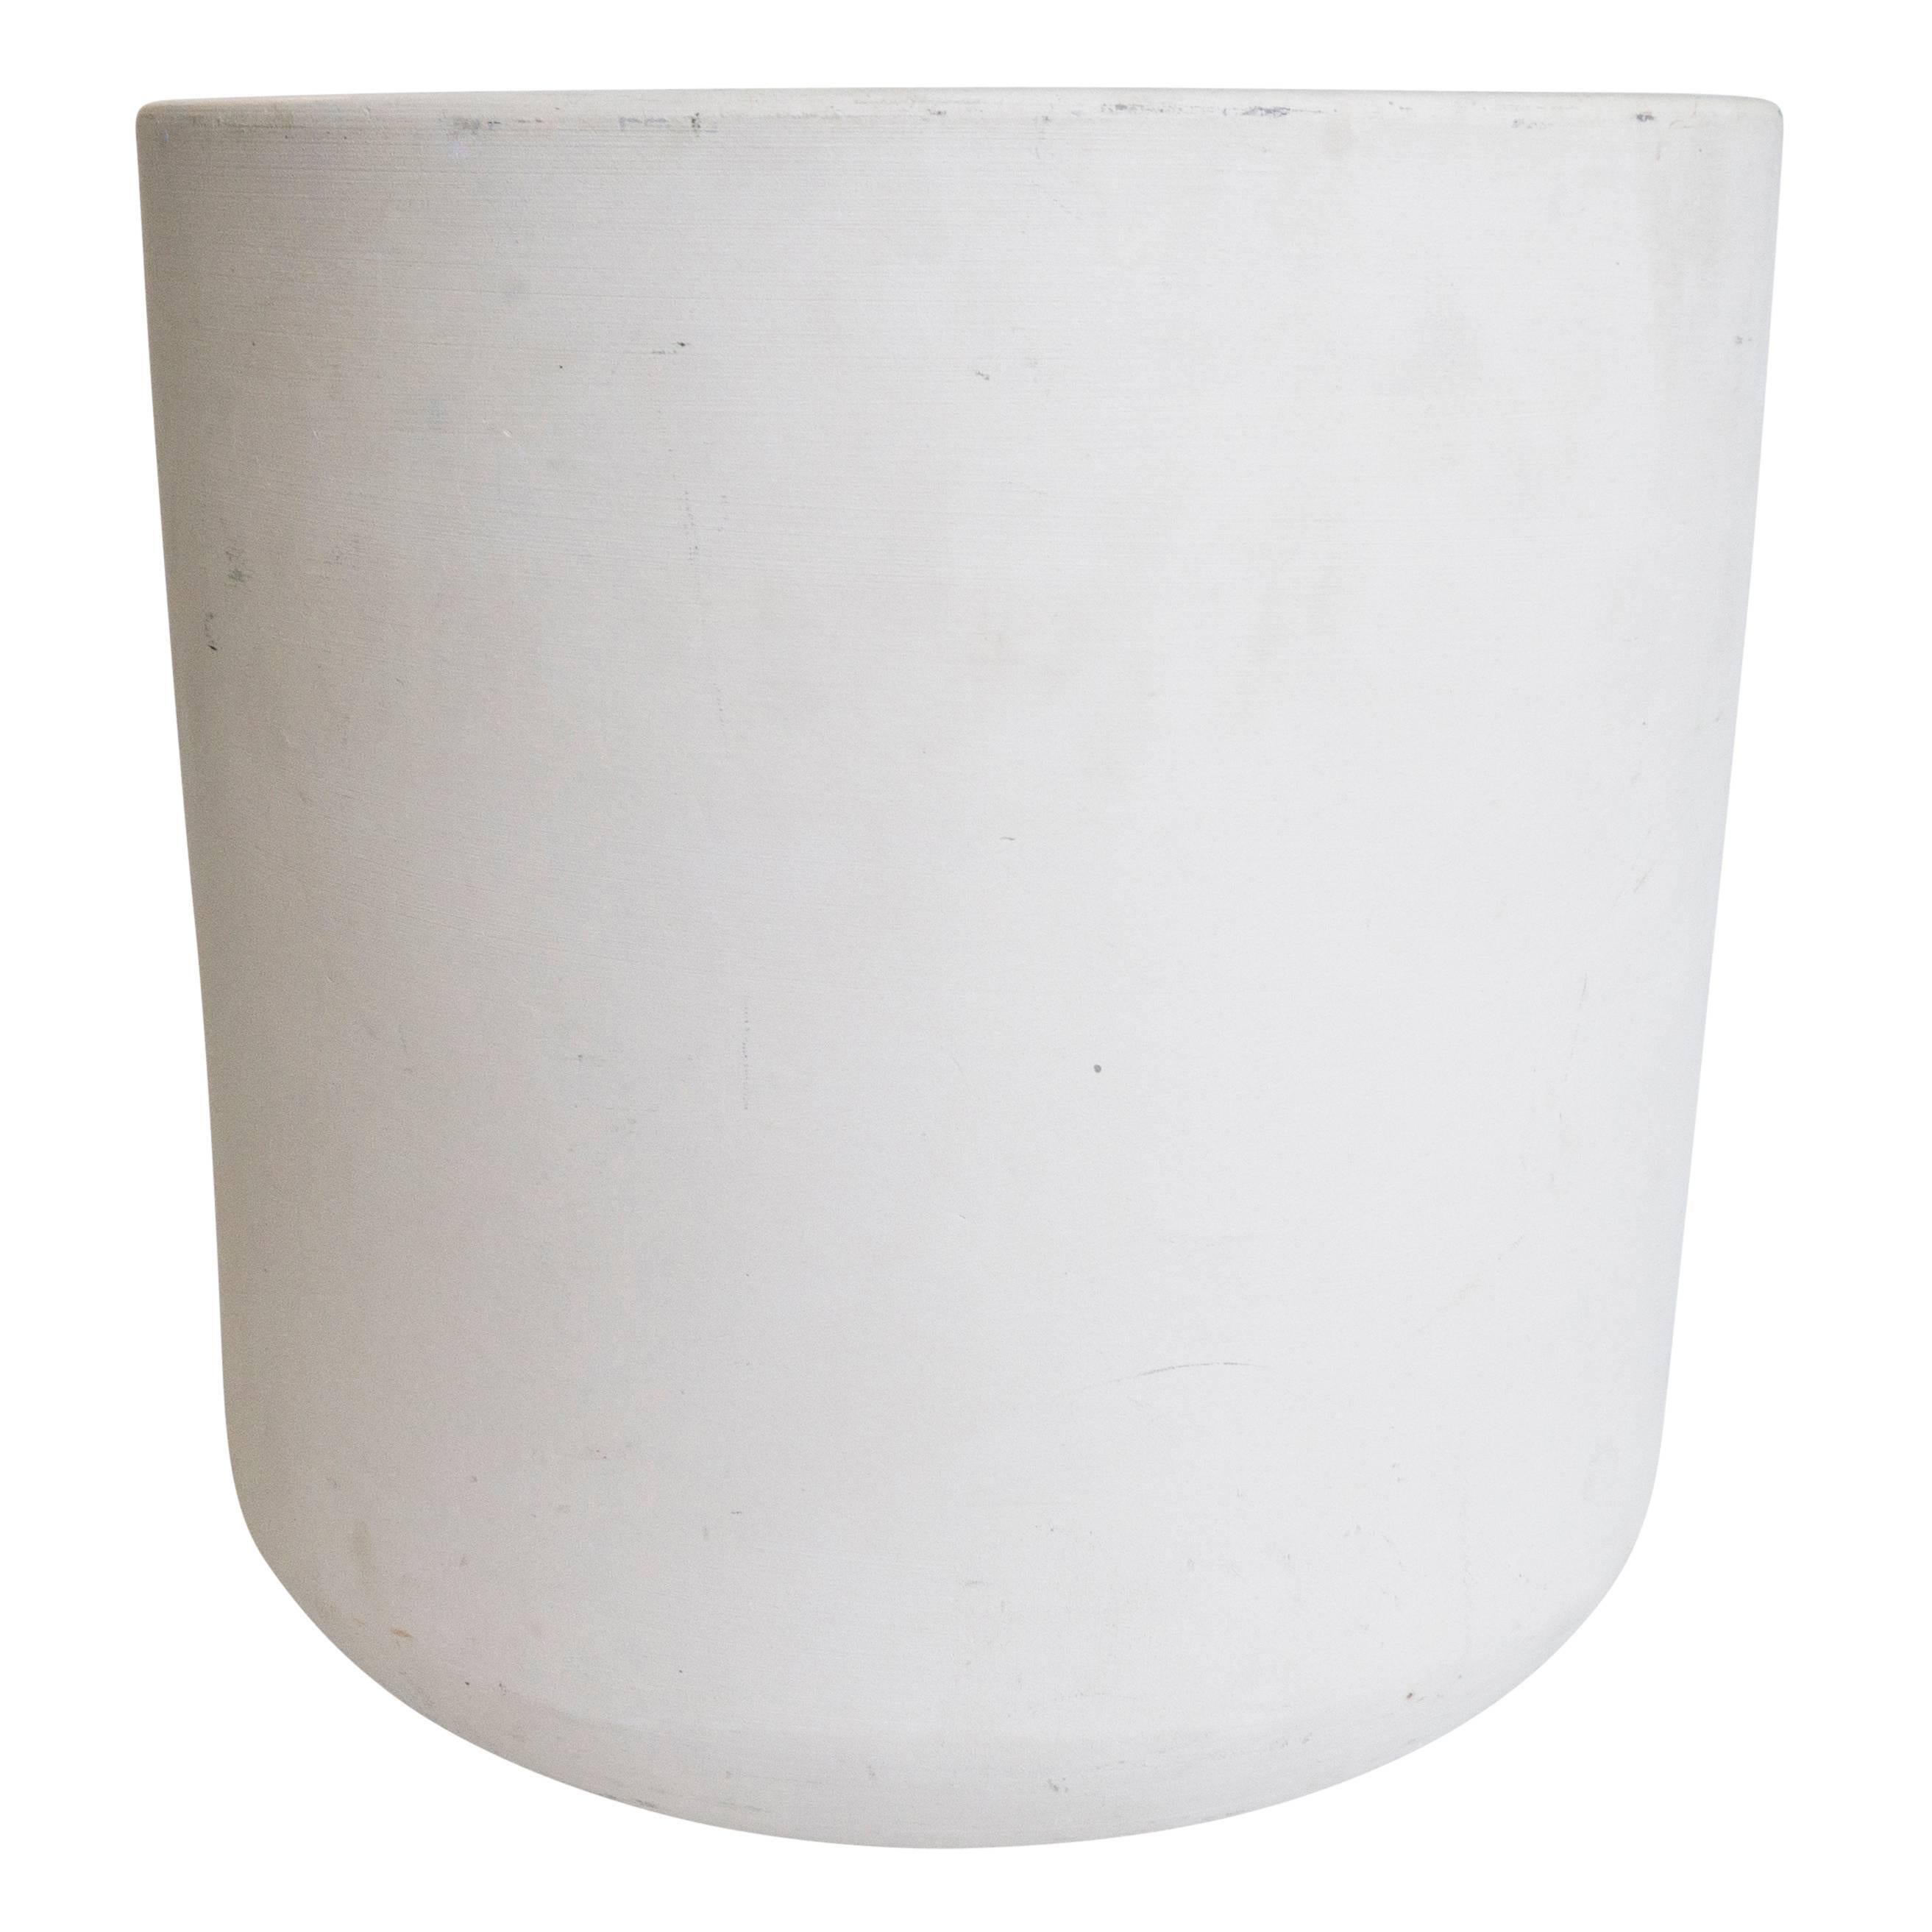 Classic white cylinder made for Architectural Pottery by artist Malcolm Leland. This strong yet petite vessel has the remnants of the Architectural Pottery logo at the bottom. Modern garden art for the home that can blend well outdoors or in a